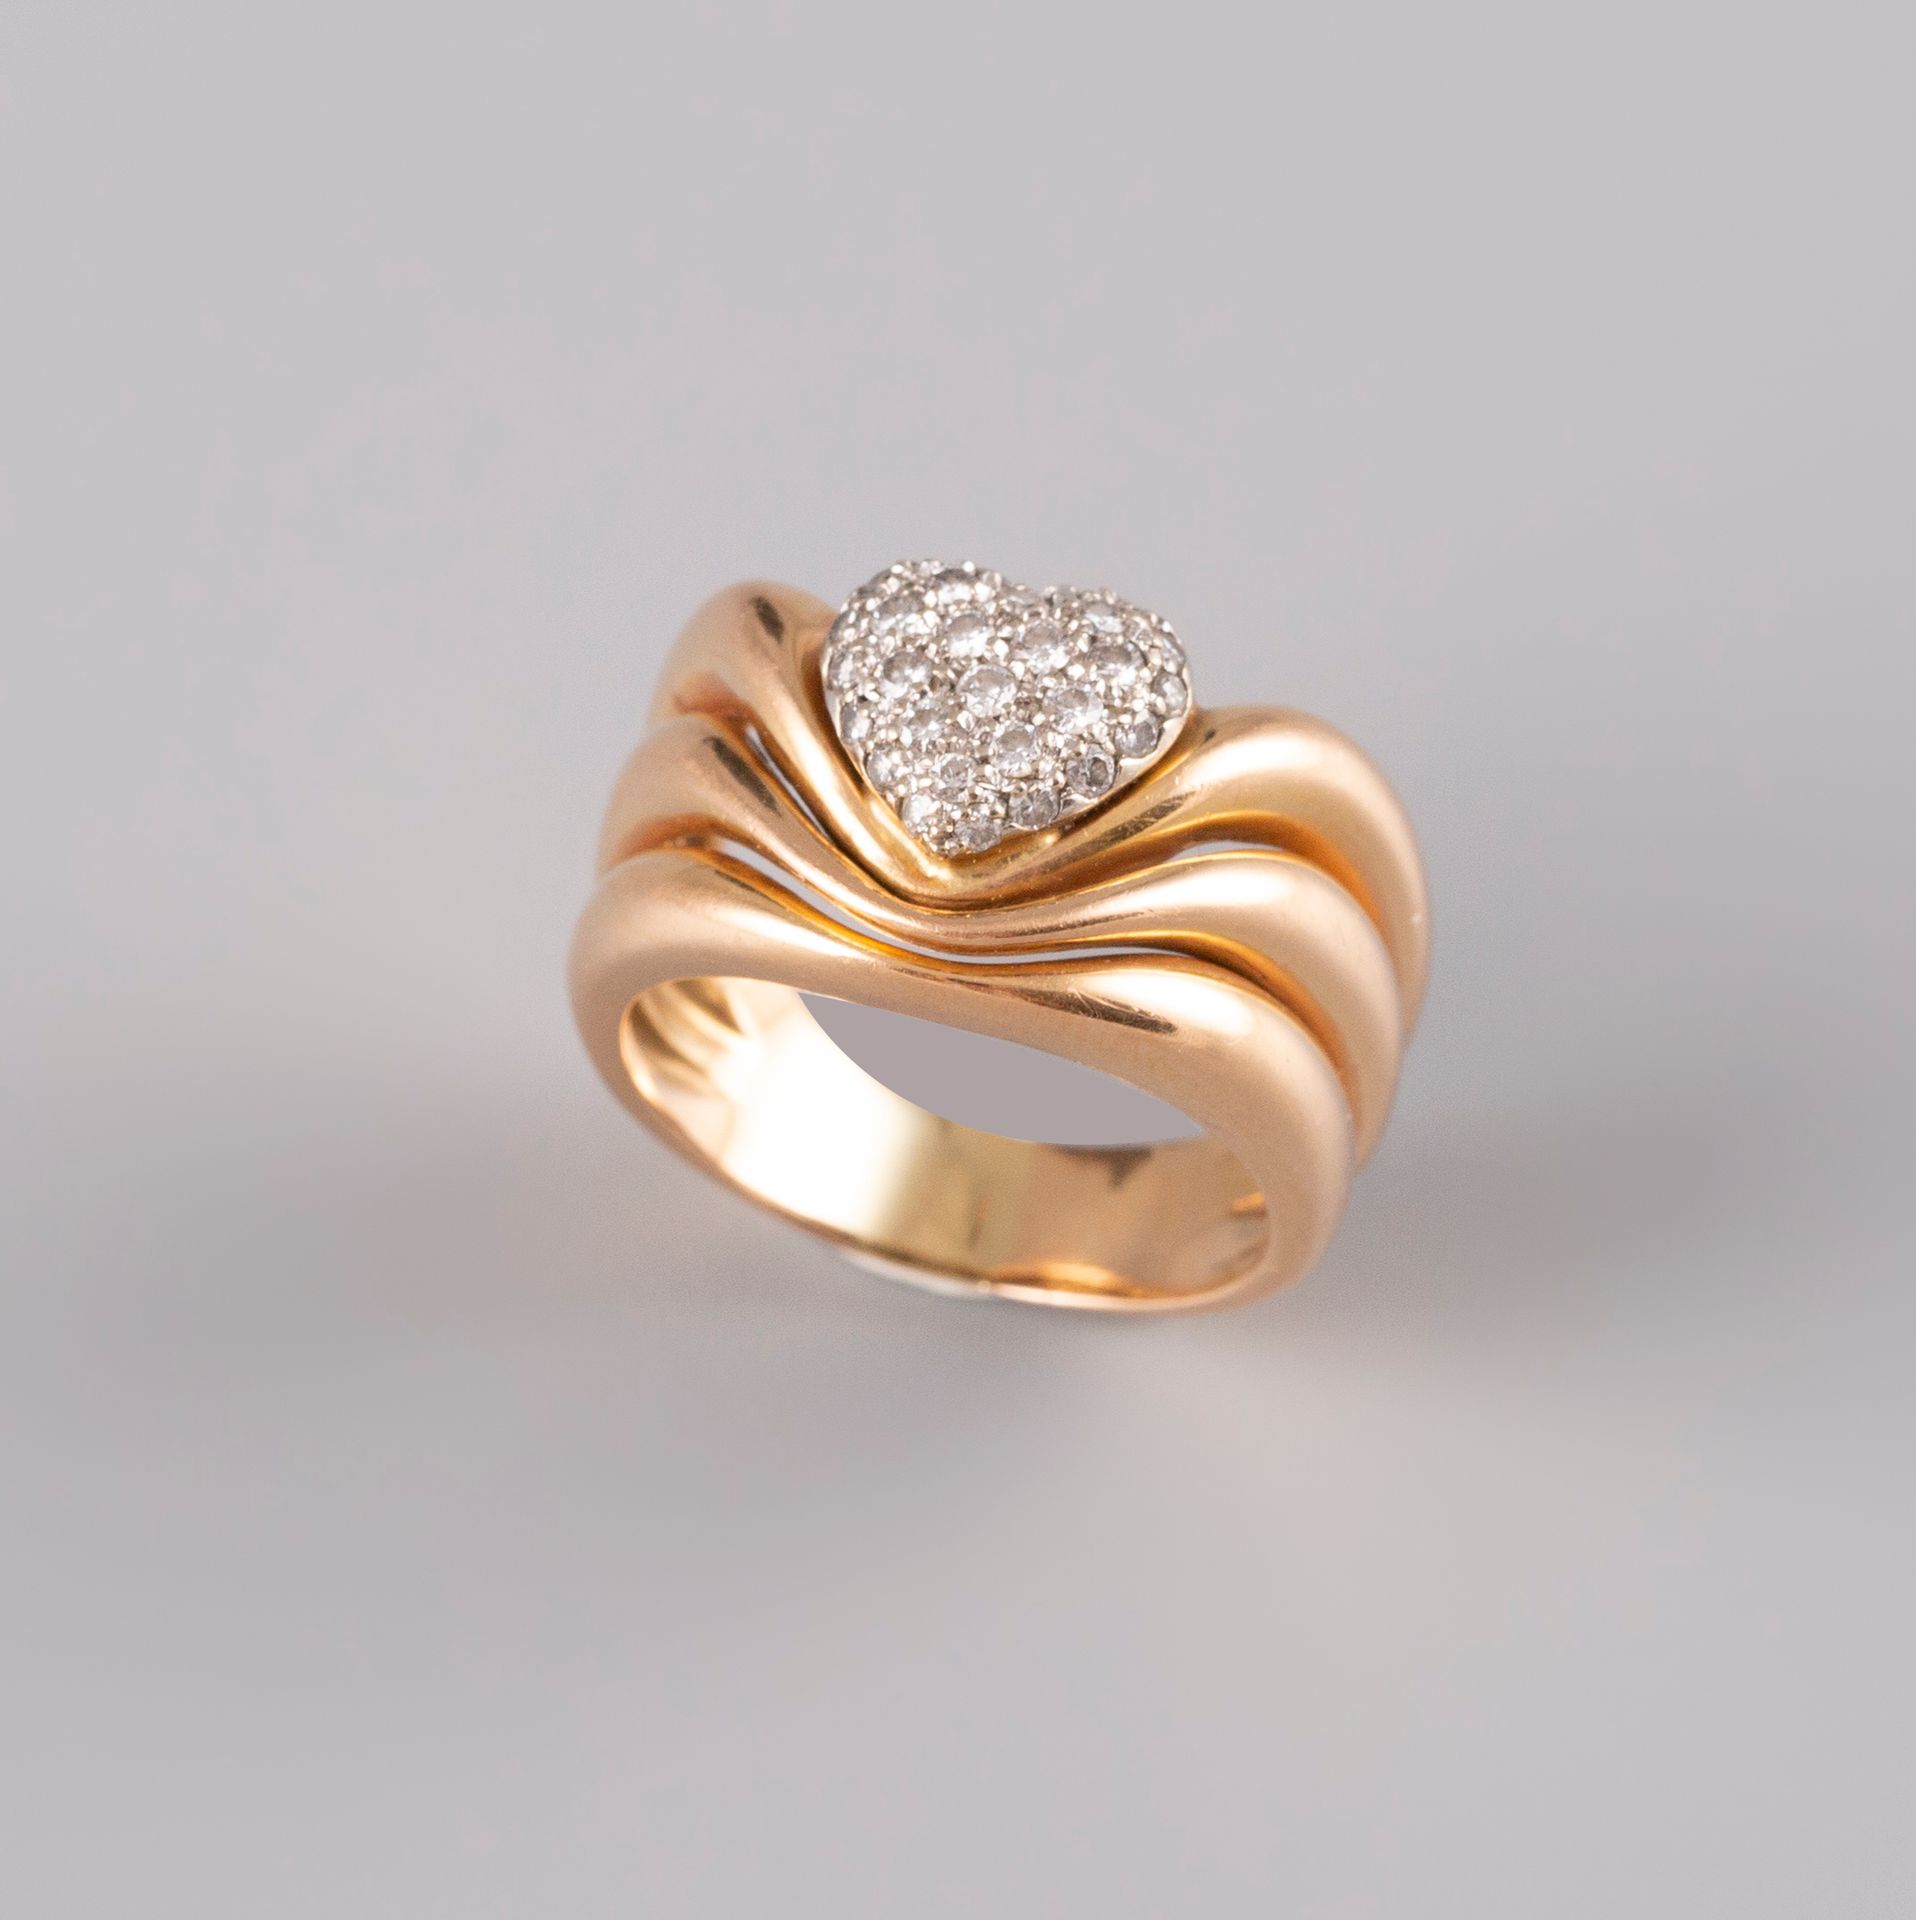 Null Ring in 18K yellow gold 750° set with small diamonds. TDD 52. PB:6,9g